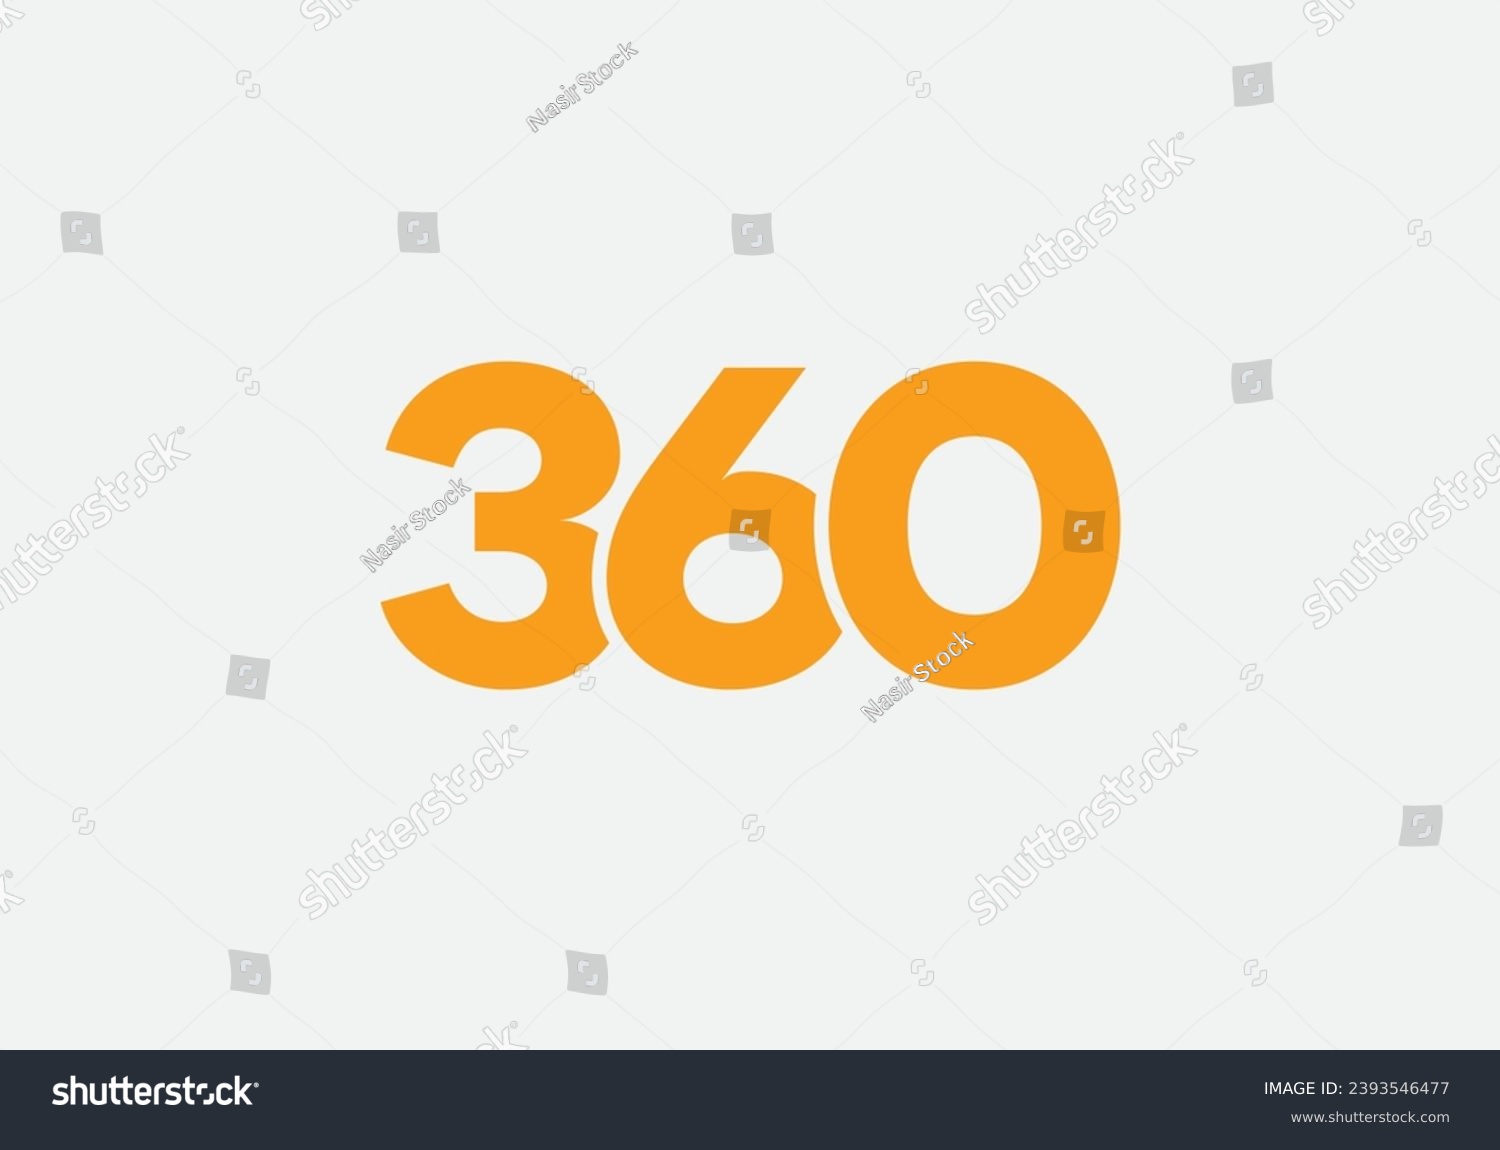 SVG of 360 degree icon and symbol. 360 degree view. Vector illustration svg